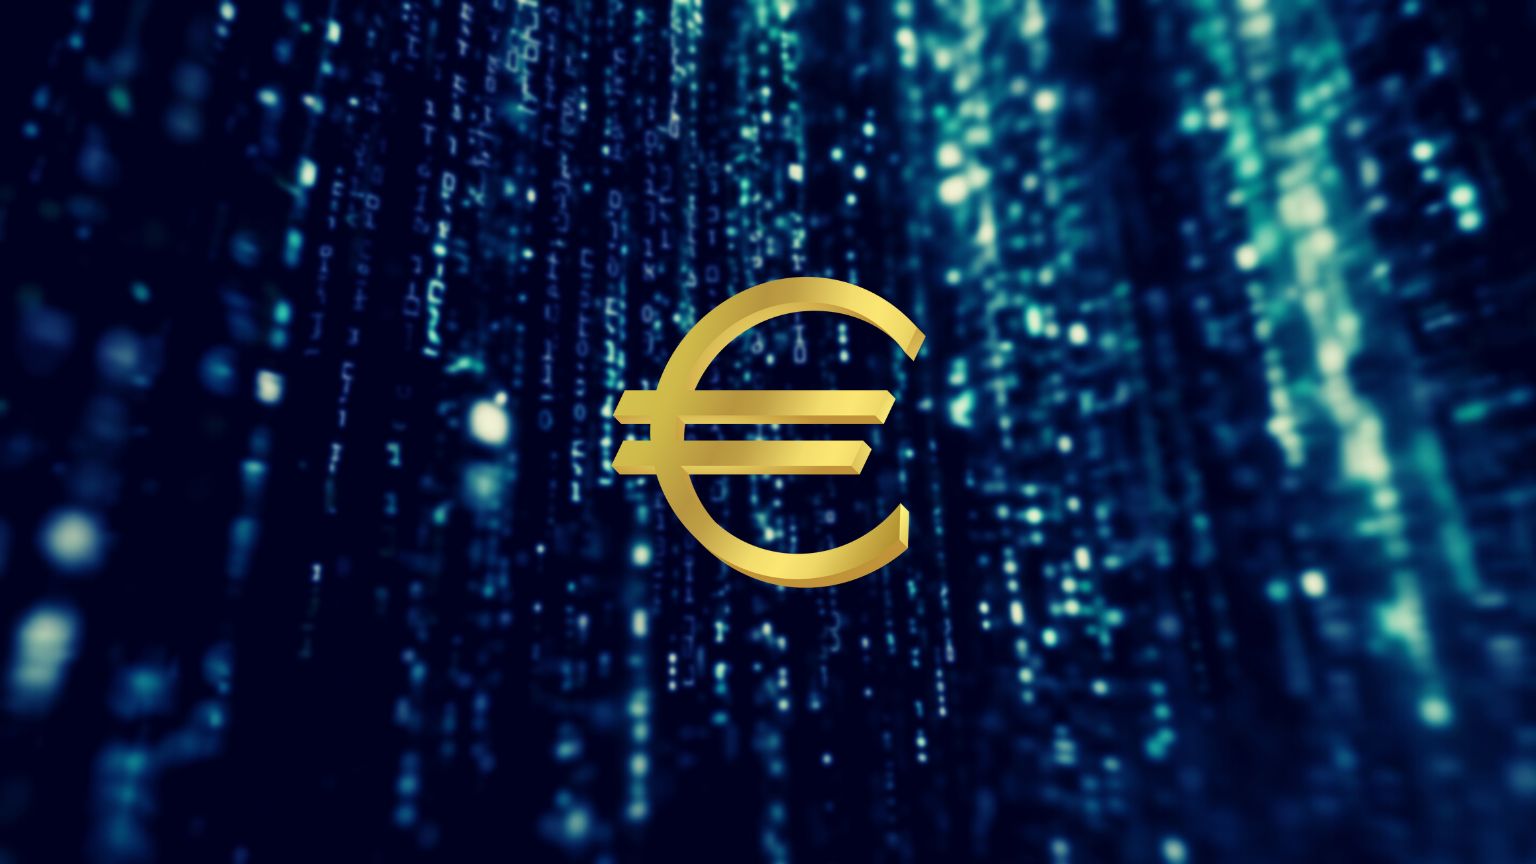 EU Steams Ahead With Controversial, Centrally-Controlled Digital Euro